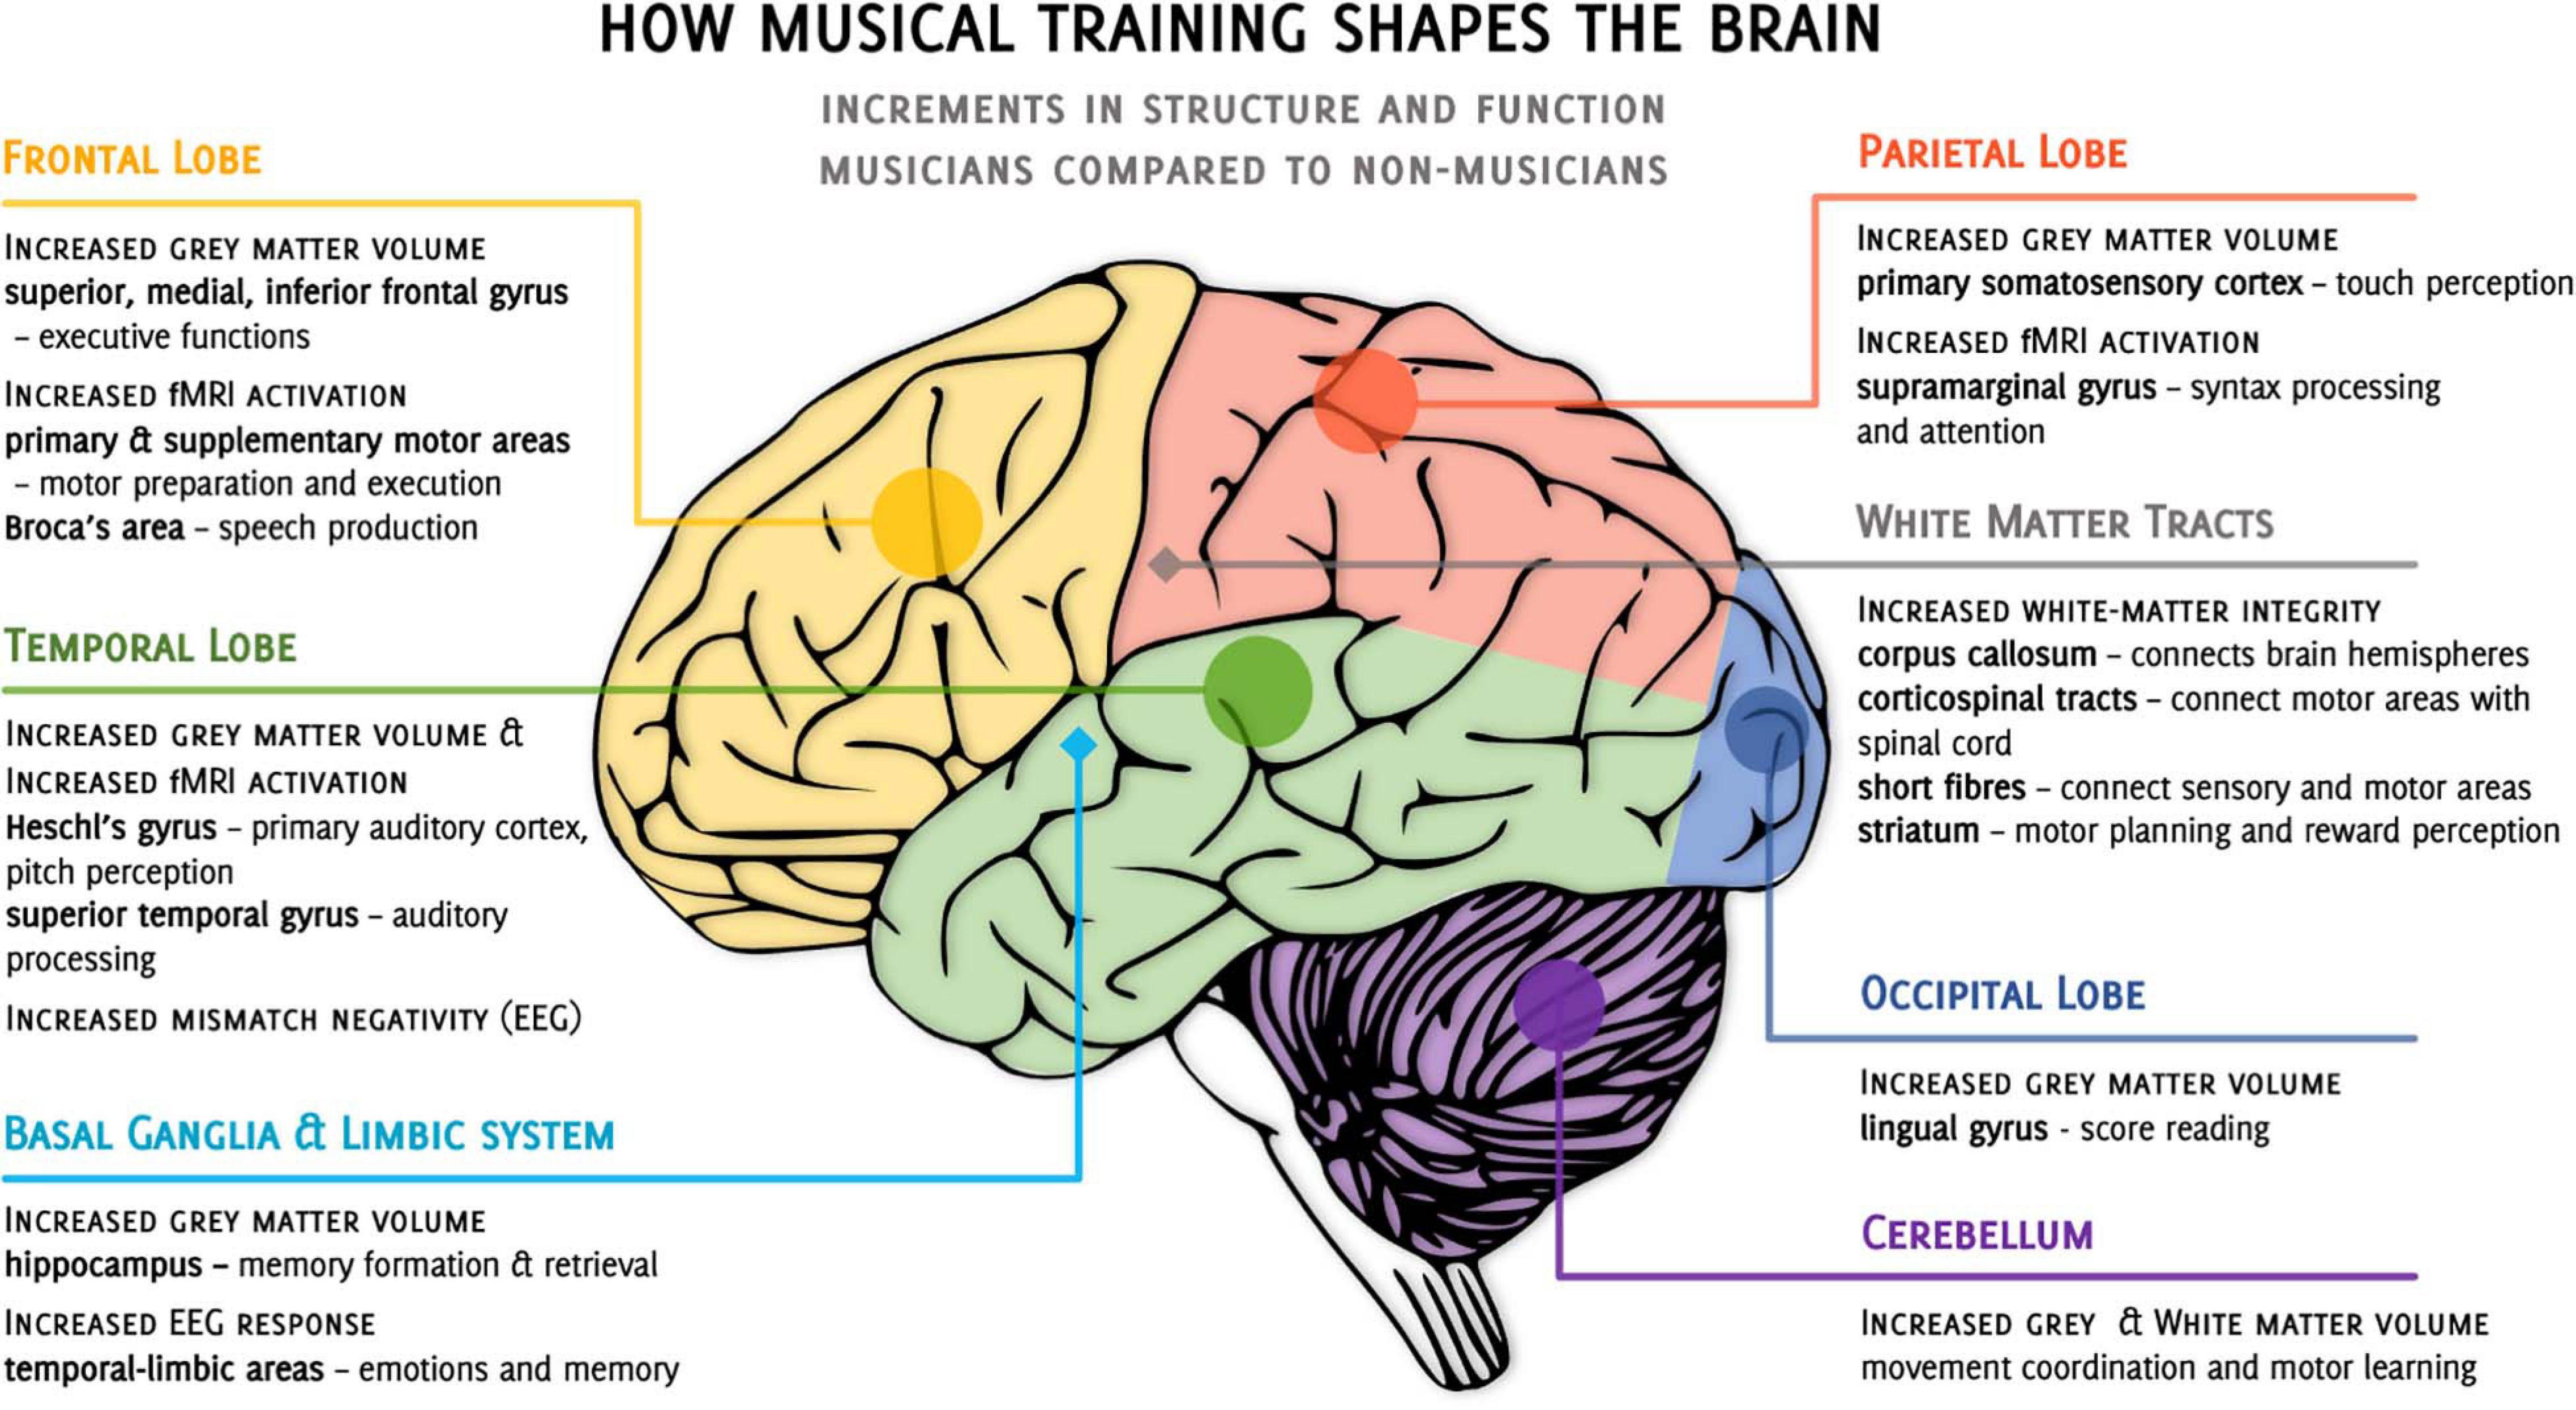 Scientists Locate Parts of Brain Devoted Primarily to Music